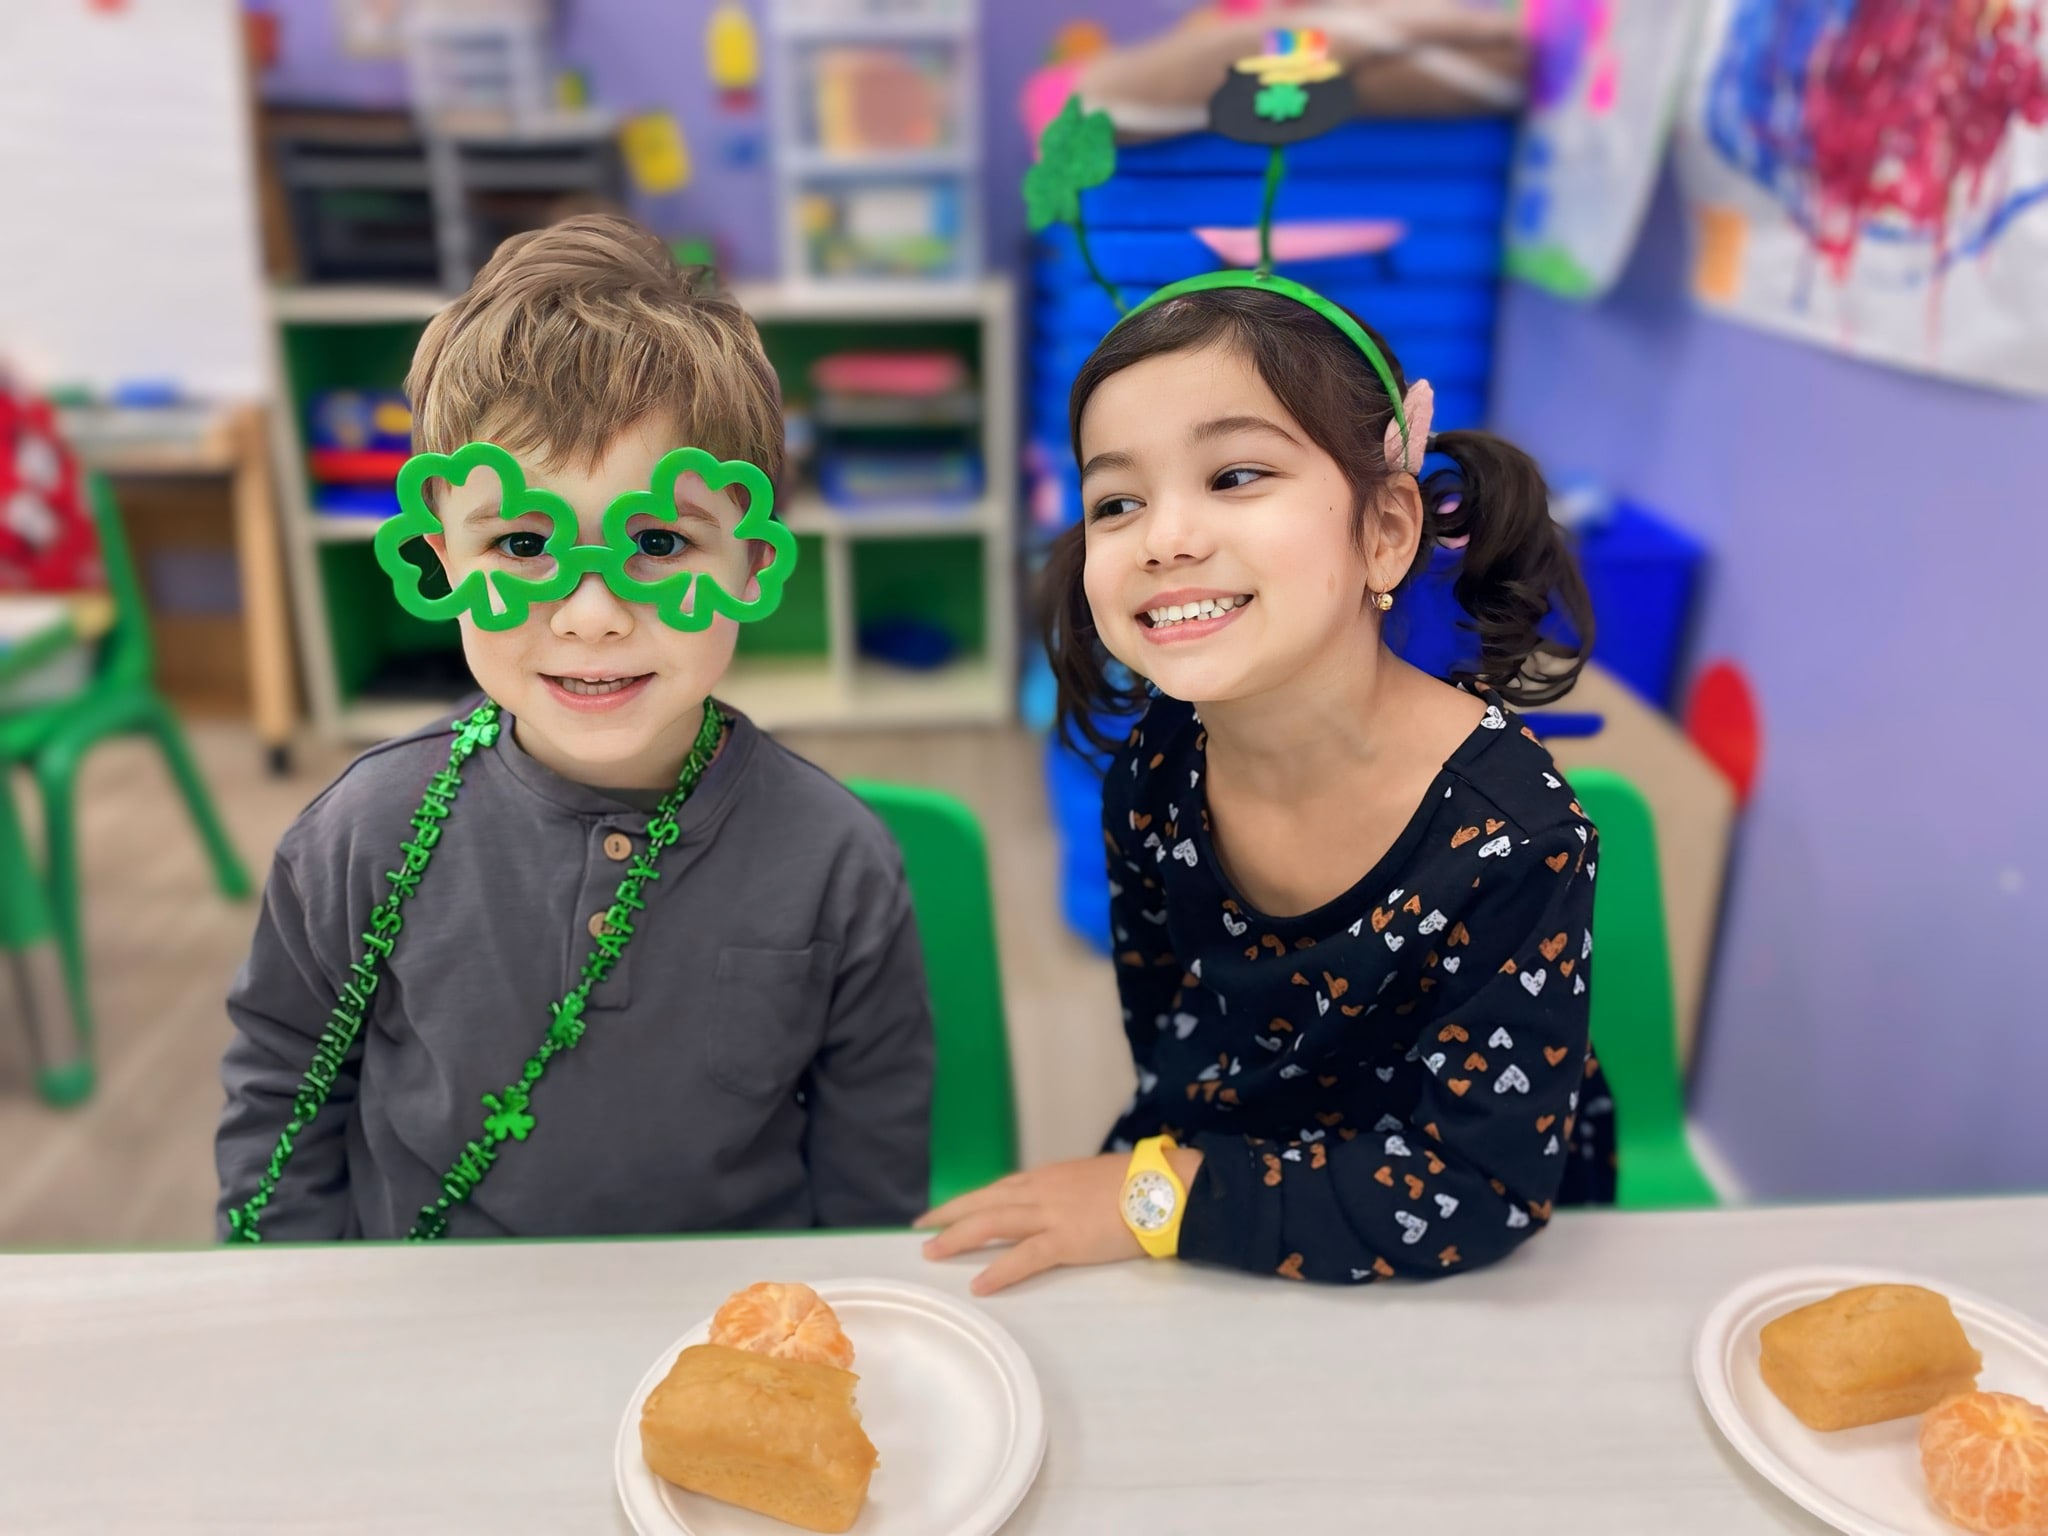 Kids celebrating St. Patrick's Day in the classroom with clover-shaped glasses and festive decorations